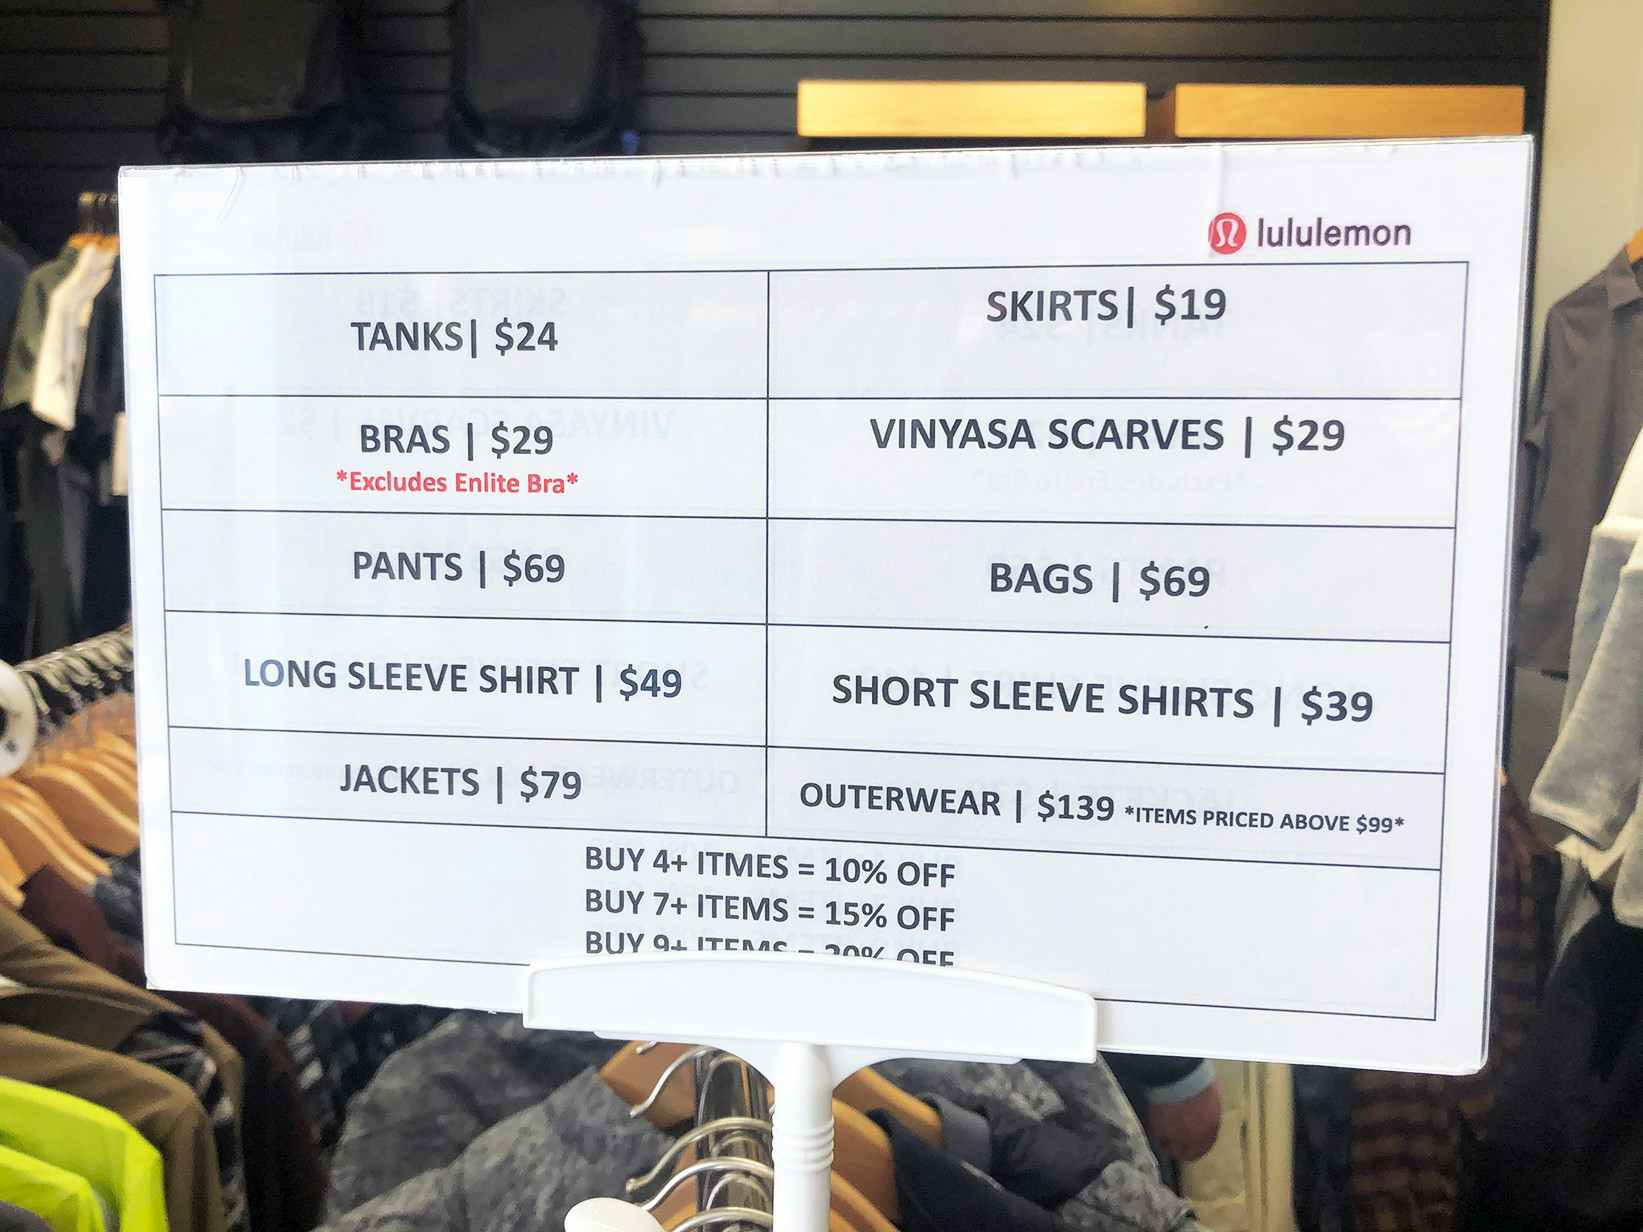 Sign inside a Lululemon outlet showing discounts on bras, tanks, bags and more